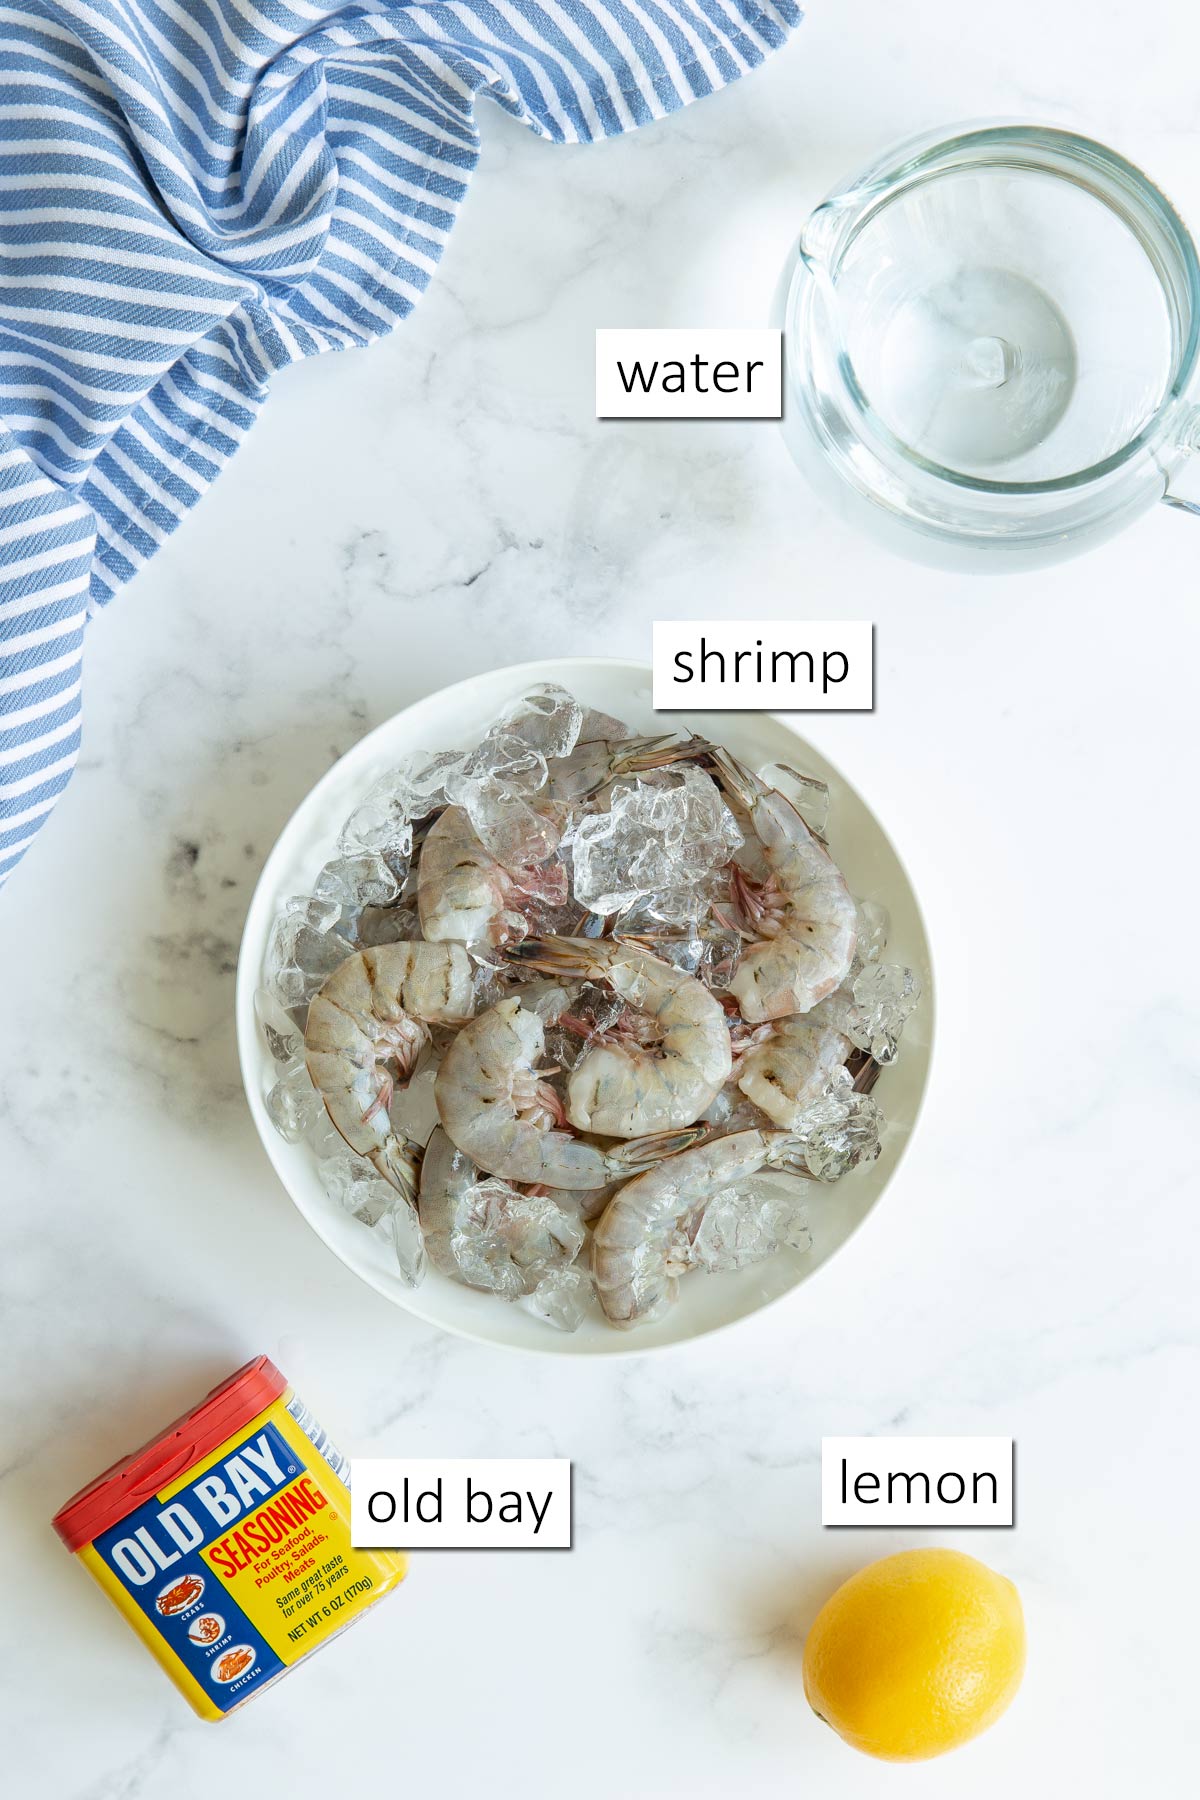 Overhead view of ingredients needed to make Old Bay steamed shrimp.